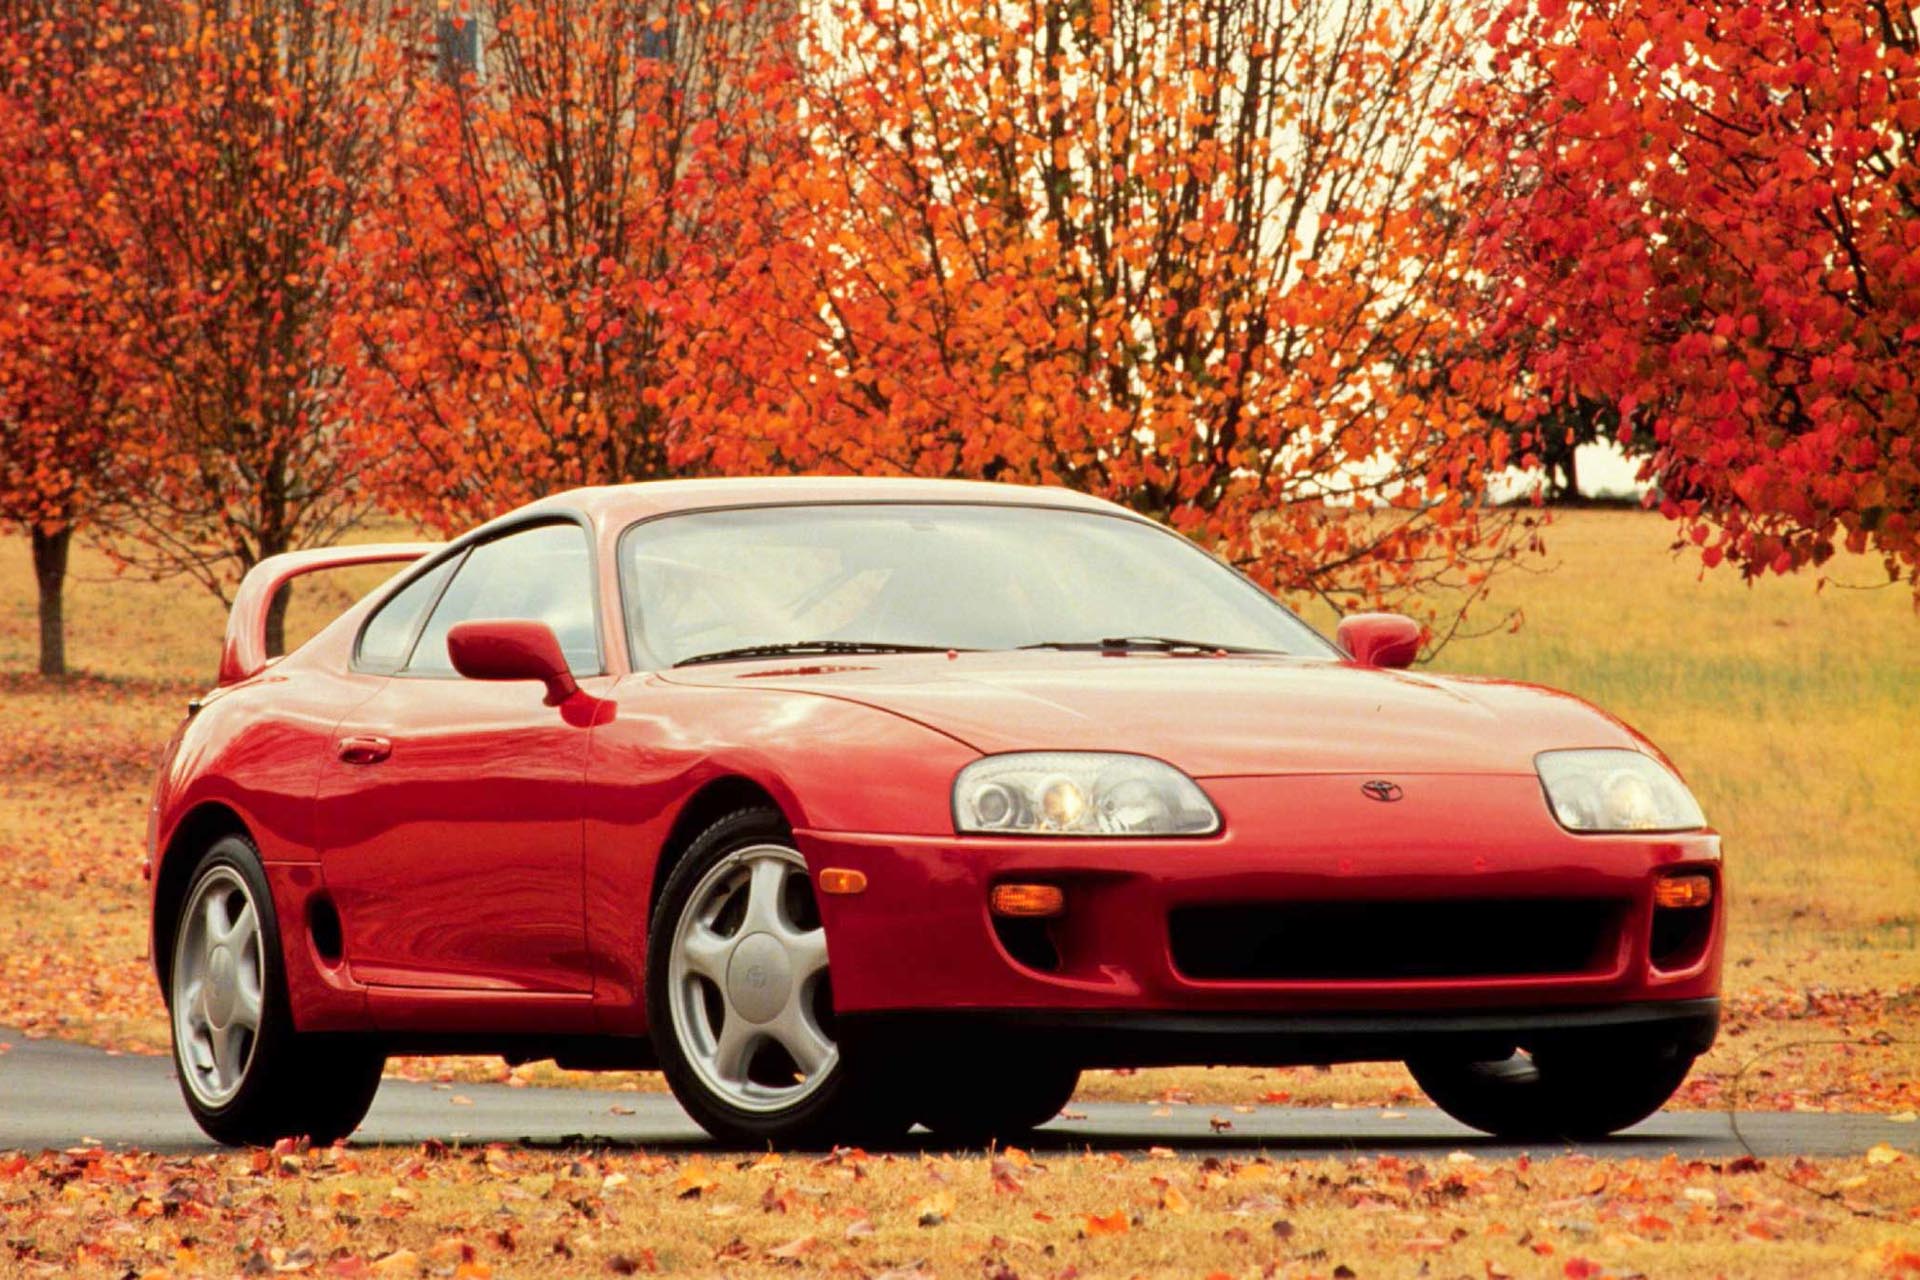 If one of these things floats up for sale, unmodified, buy it yesterday and stick it in the vault. Bound to skyrocket in value, the twin-turbo Supra was king of the hill in the wild days of Japanese muscle, and this limited-edition version will be a collector's favourite.